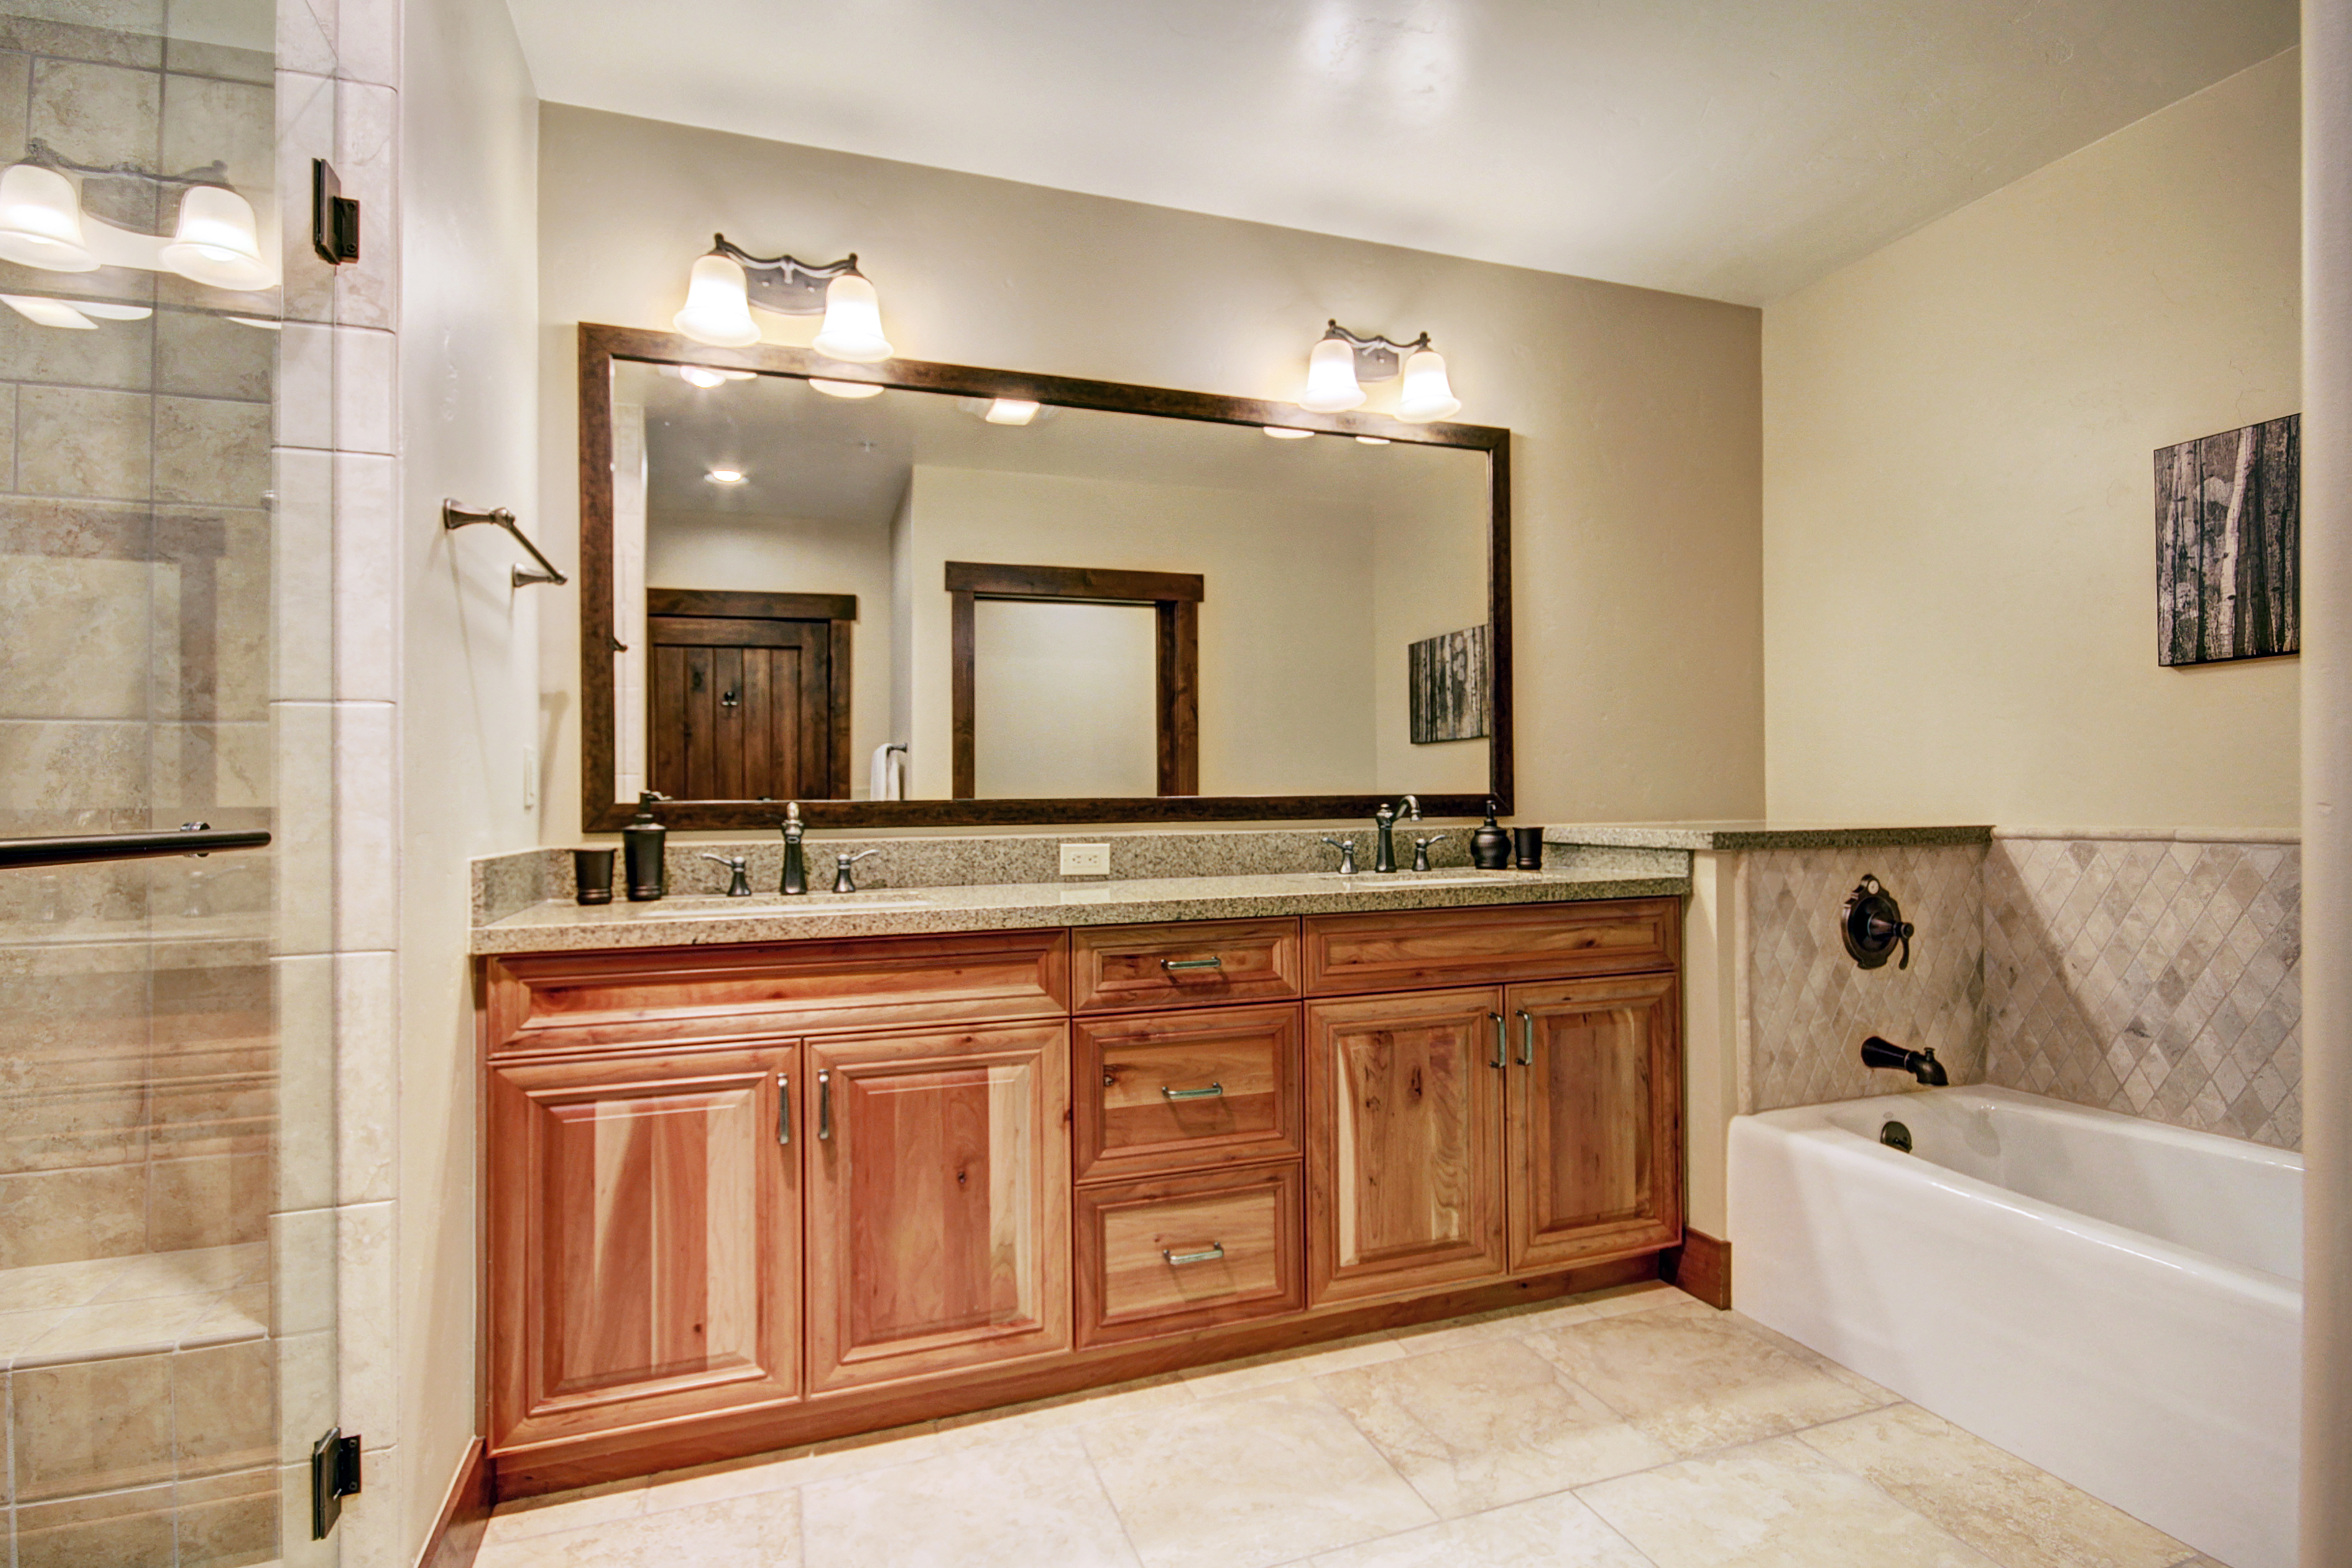 Master private bath with a walk-in shower, bathtub, and 2 sinks.